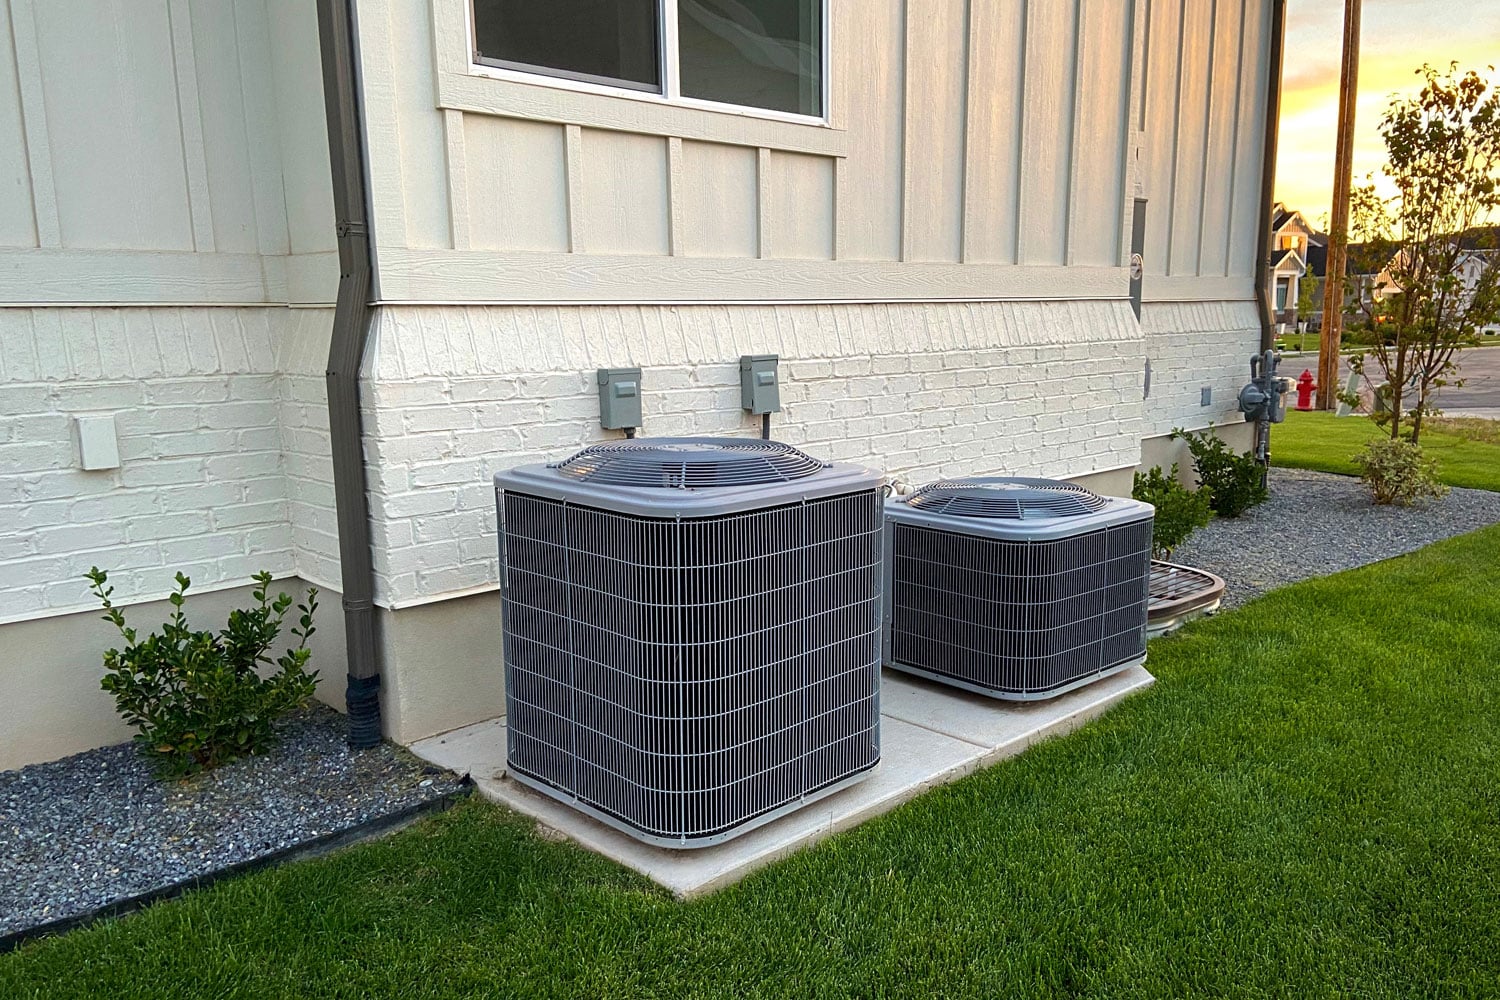 Double air conditioning unit mounted on small concrete slabs